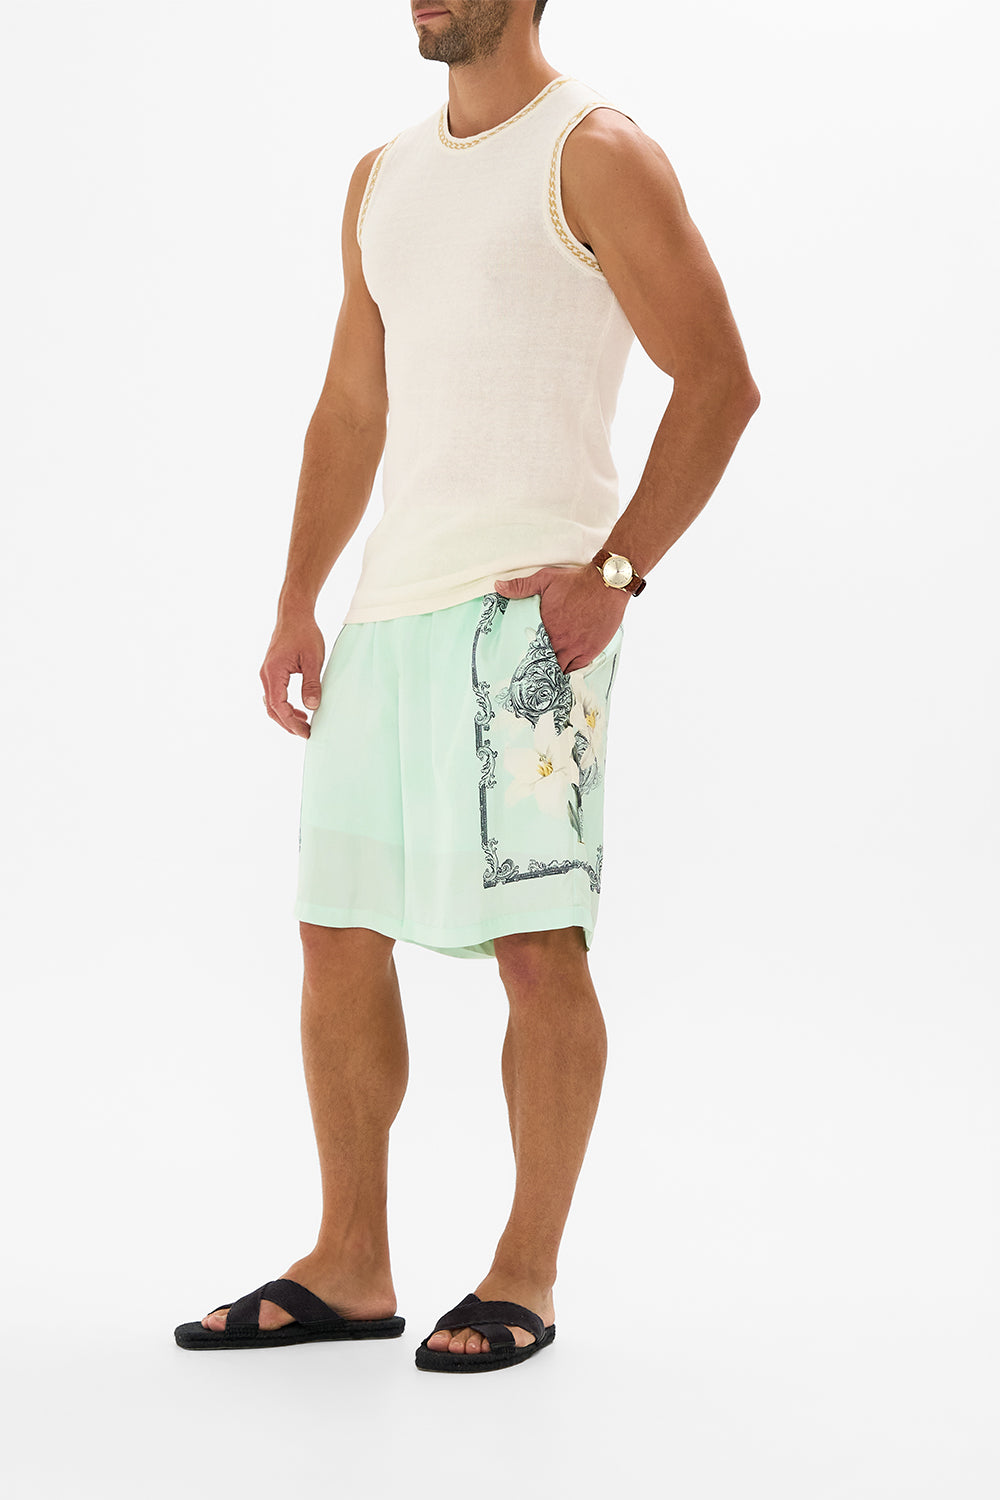 CAMILLA floral baggy mid length walk short in Petal Promise Land